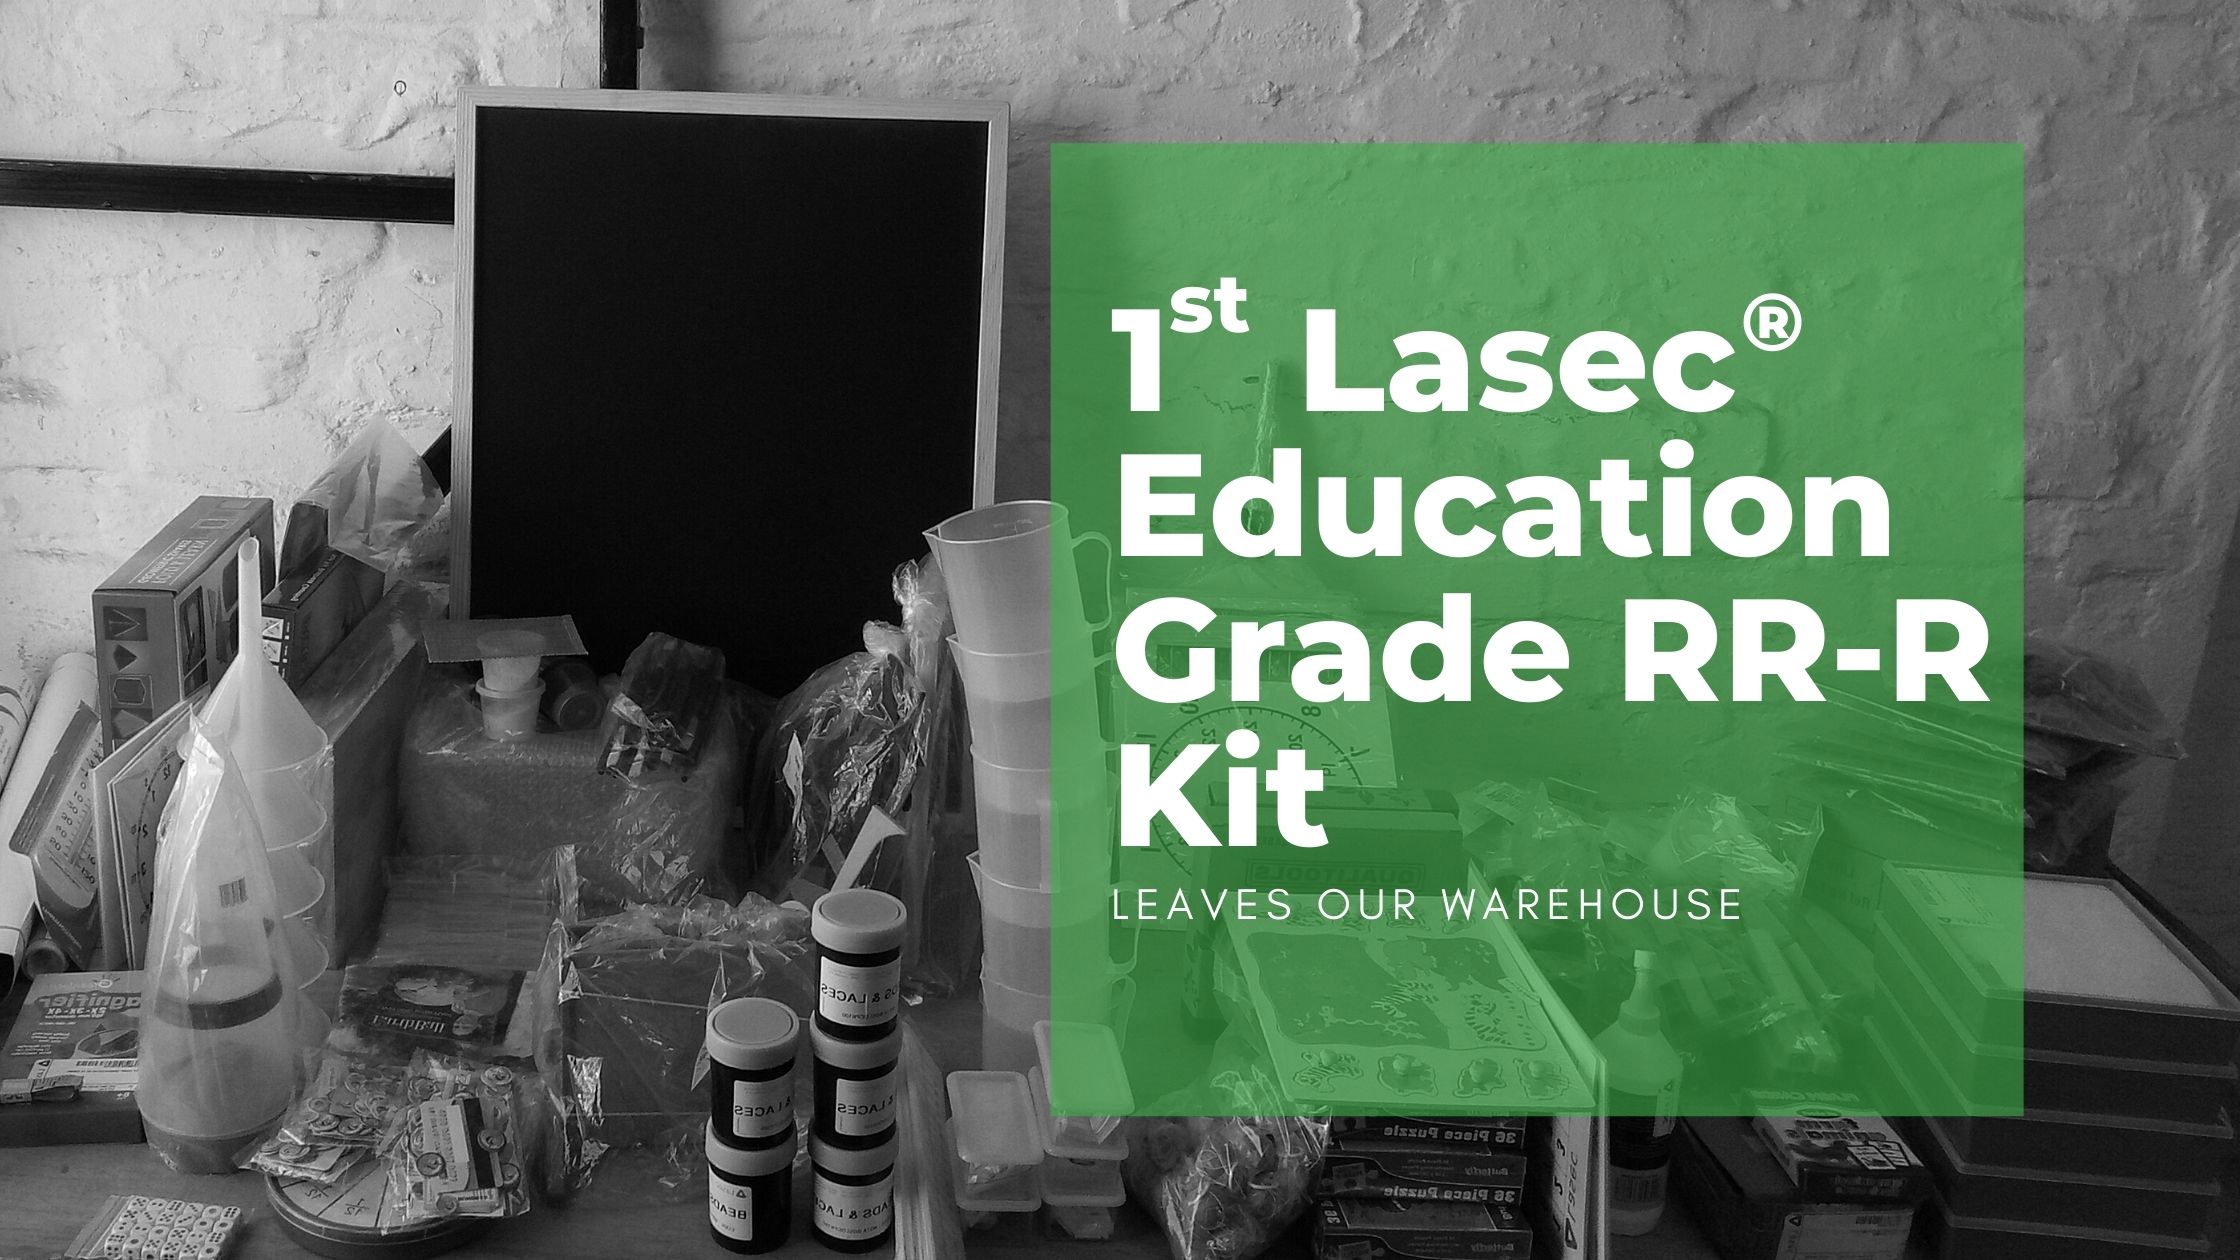 Why We Love our Grade RR-R Educational Kit (and You Should Too!)